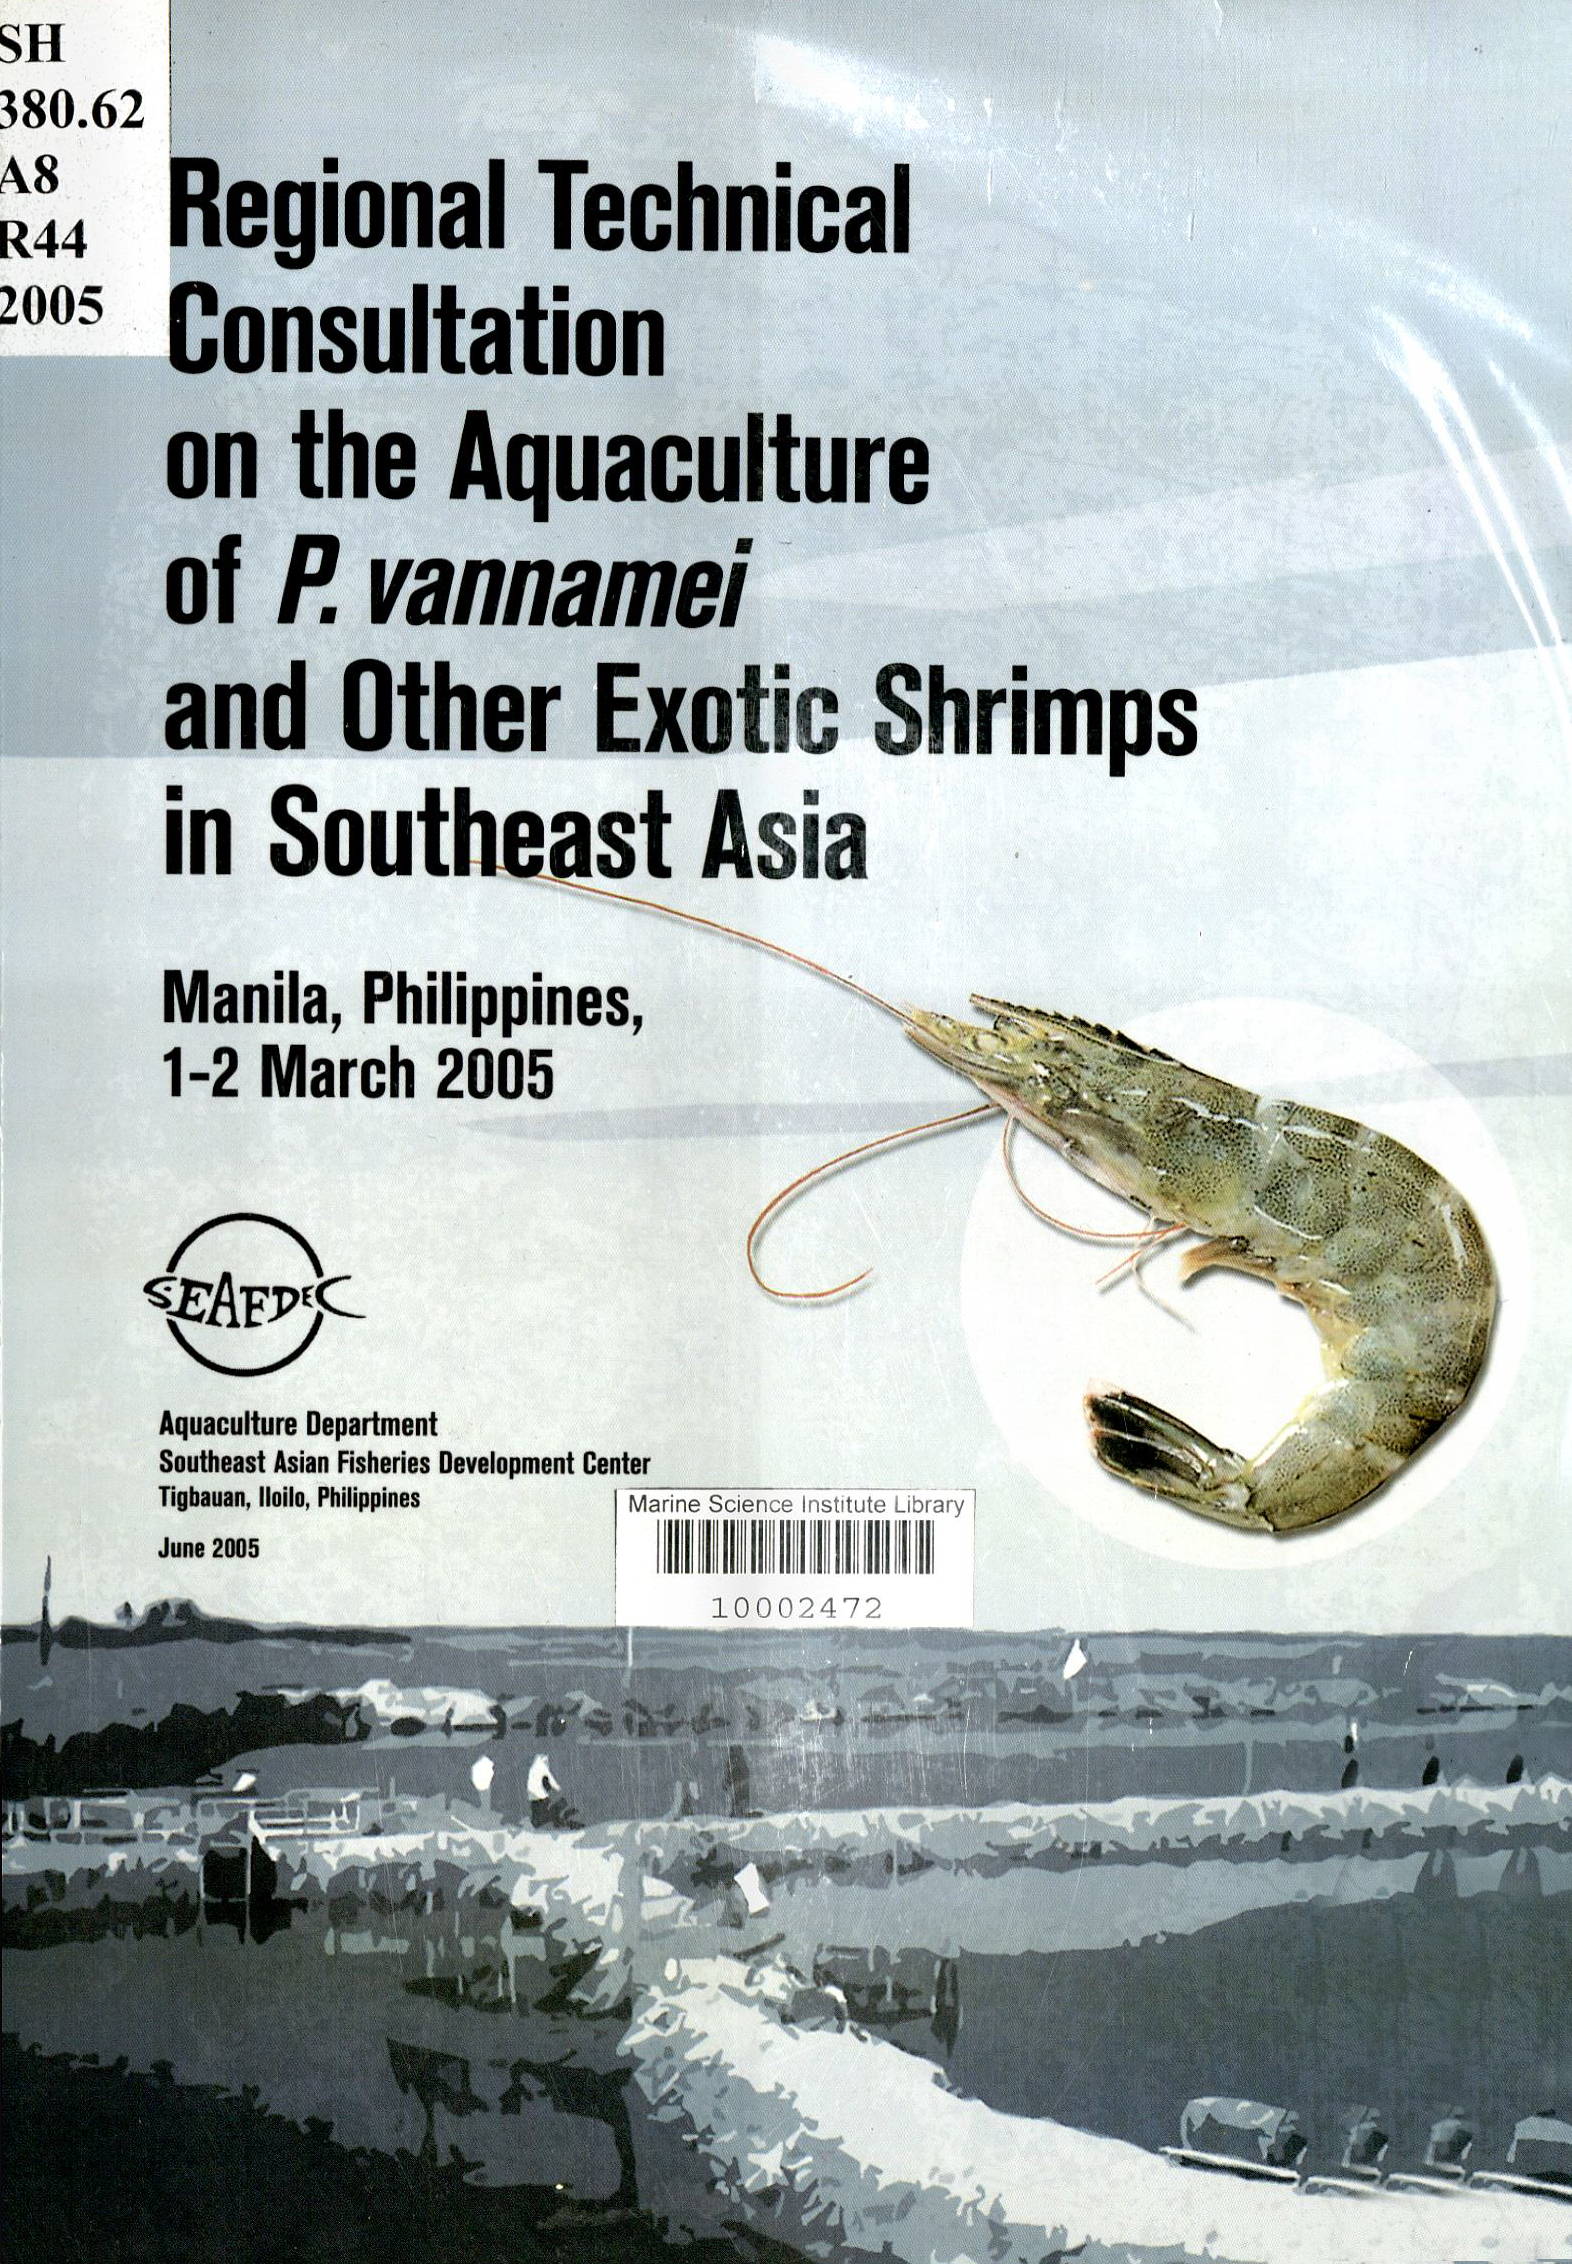 The report of the regional technical consultation on the aquaculture of P. vannamei and other exotic shrimps in Southeast Asia.